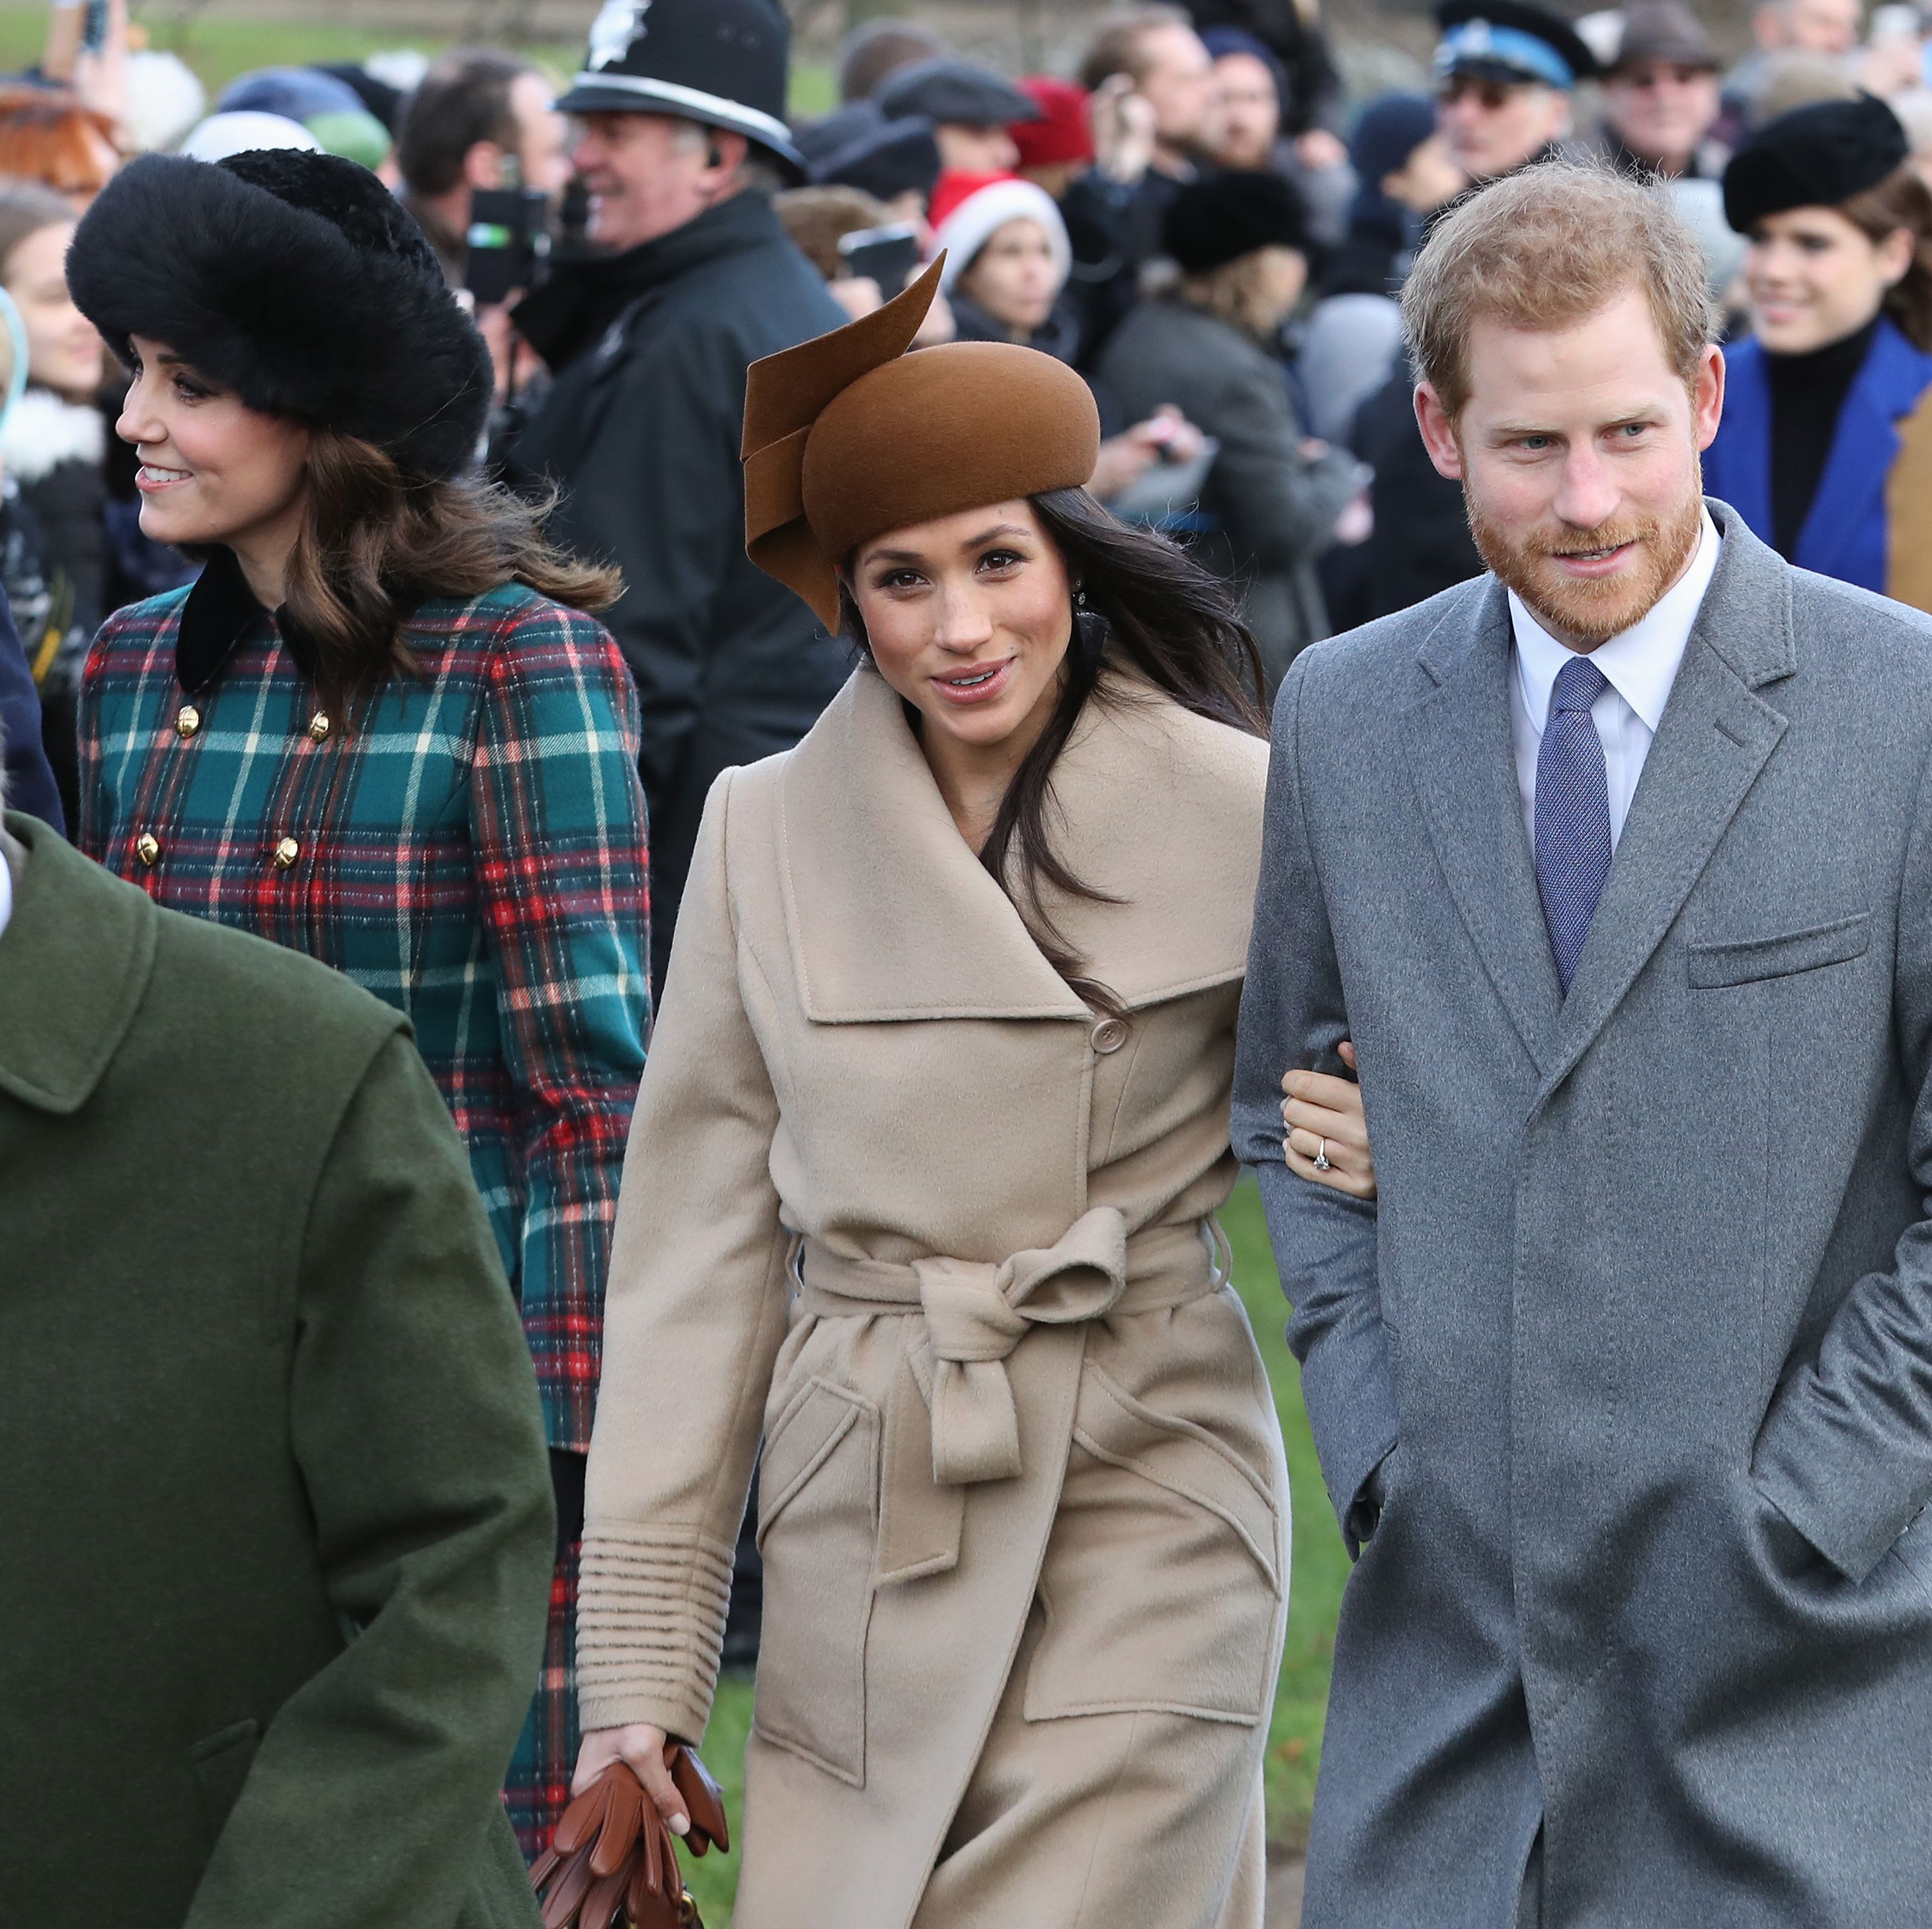 Meghan Markle Explains Why She Intentionally Never Wore Color Around the Royal Family